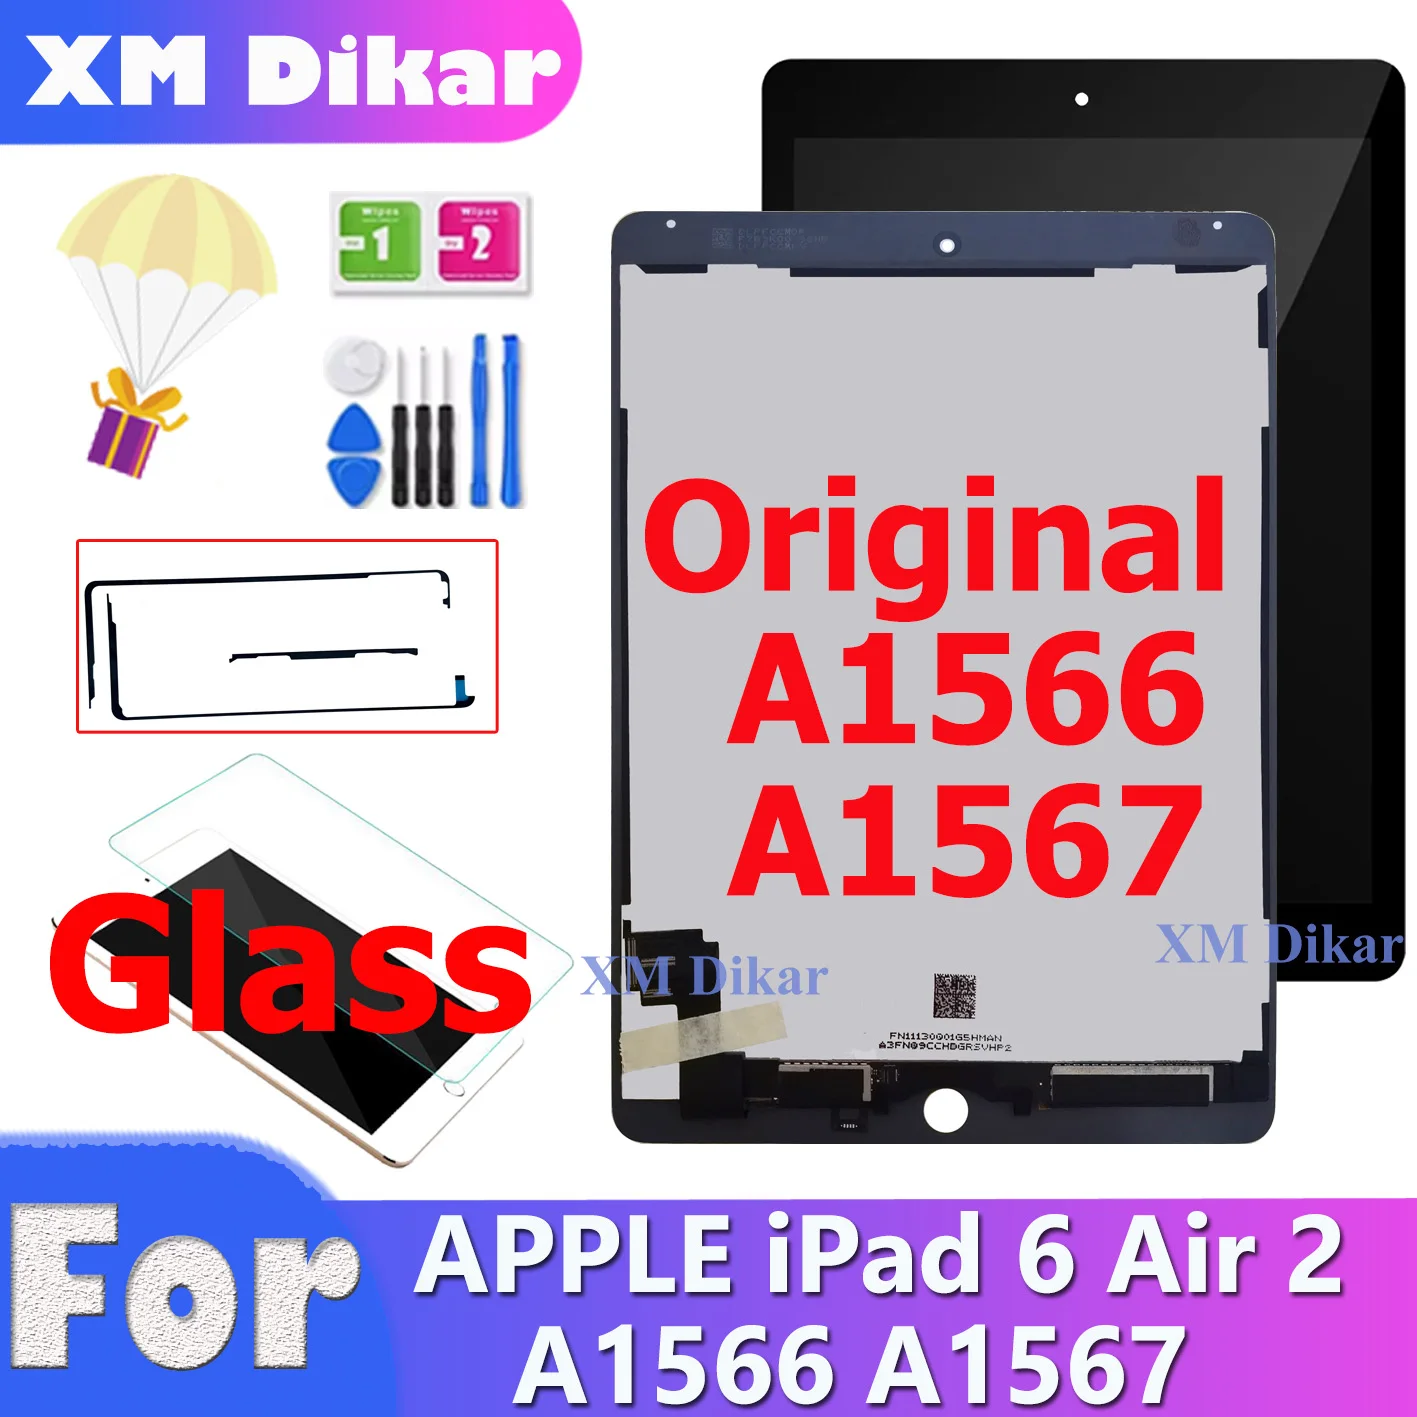 Fix2sailing For Apple iPad 6 Air 2 A1567 A1566 LCD Display Touch Screen  Digitizer Sensors Assembly